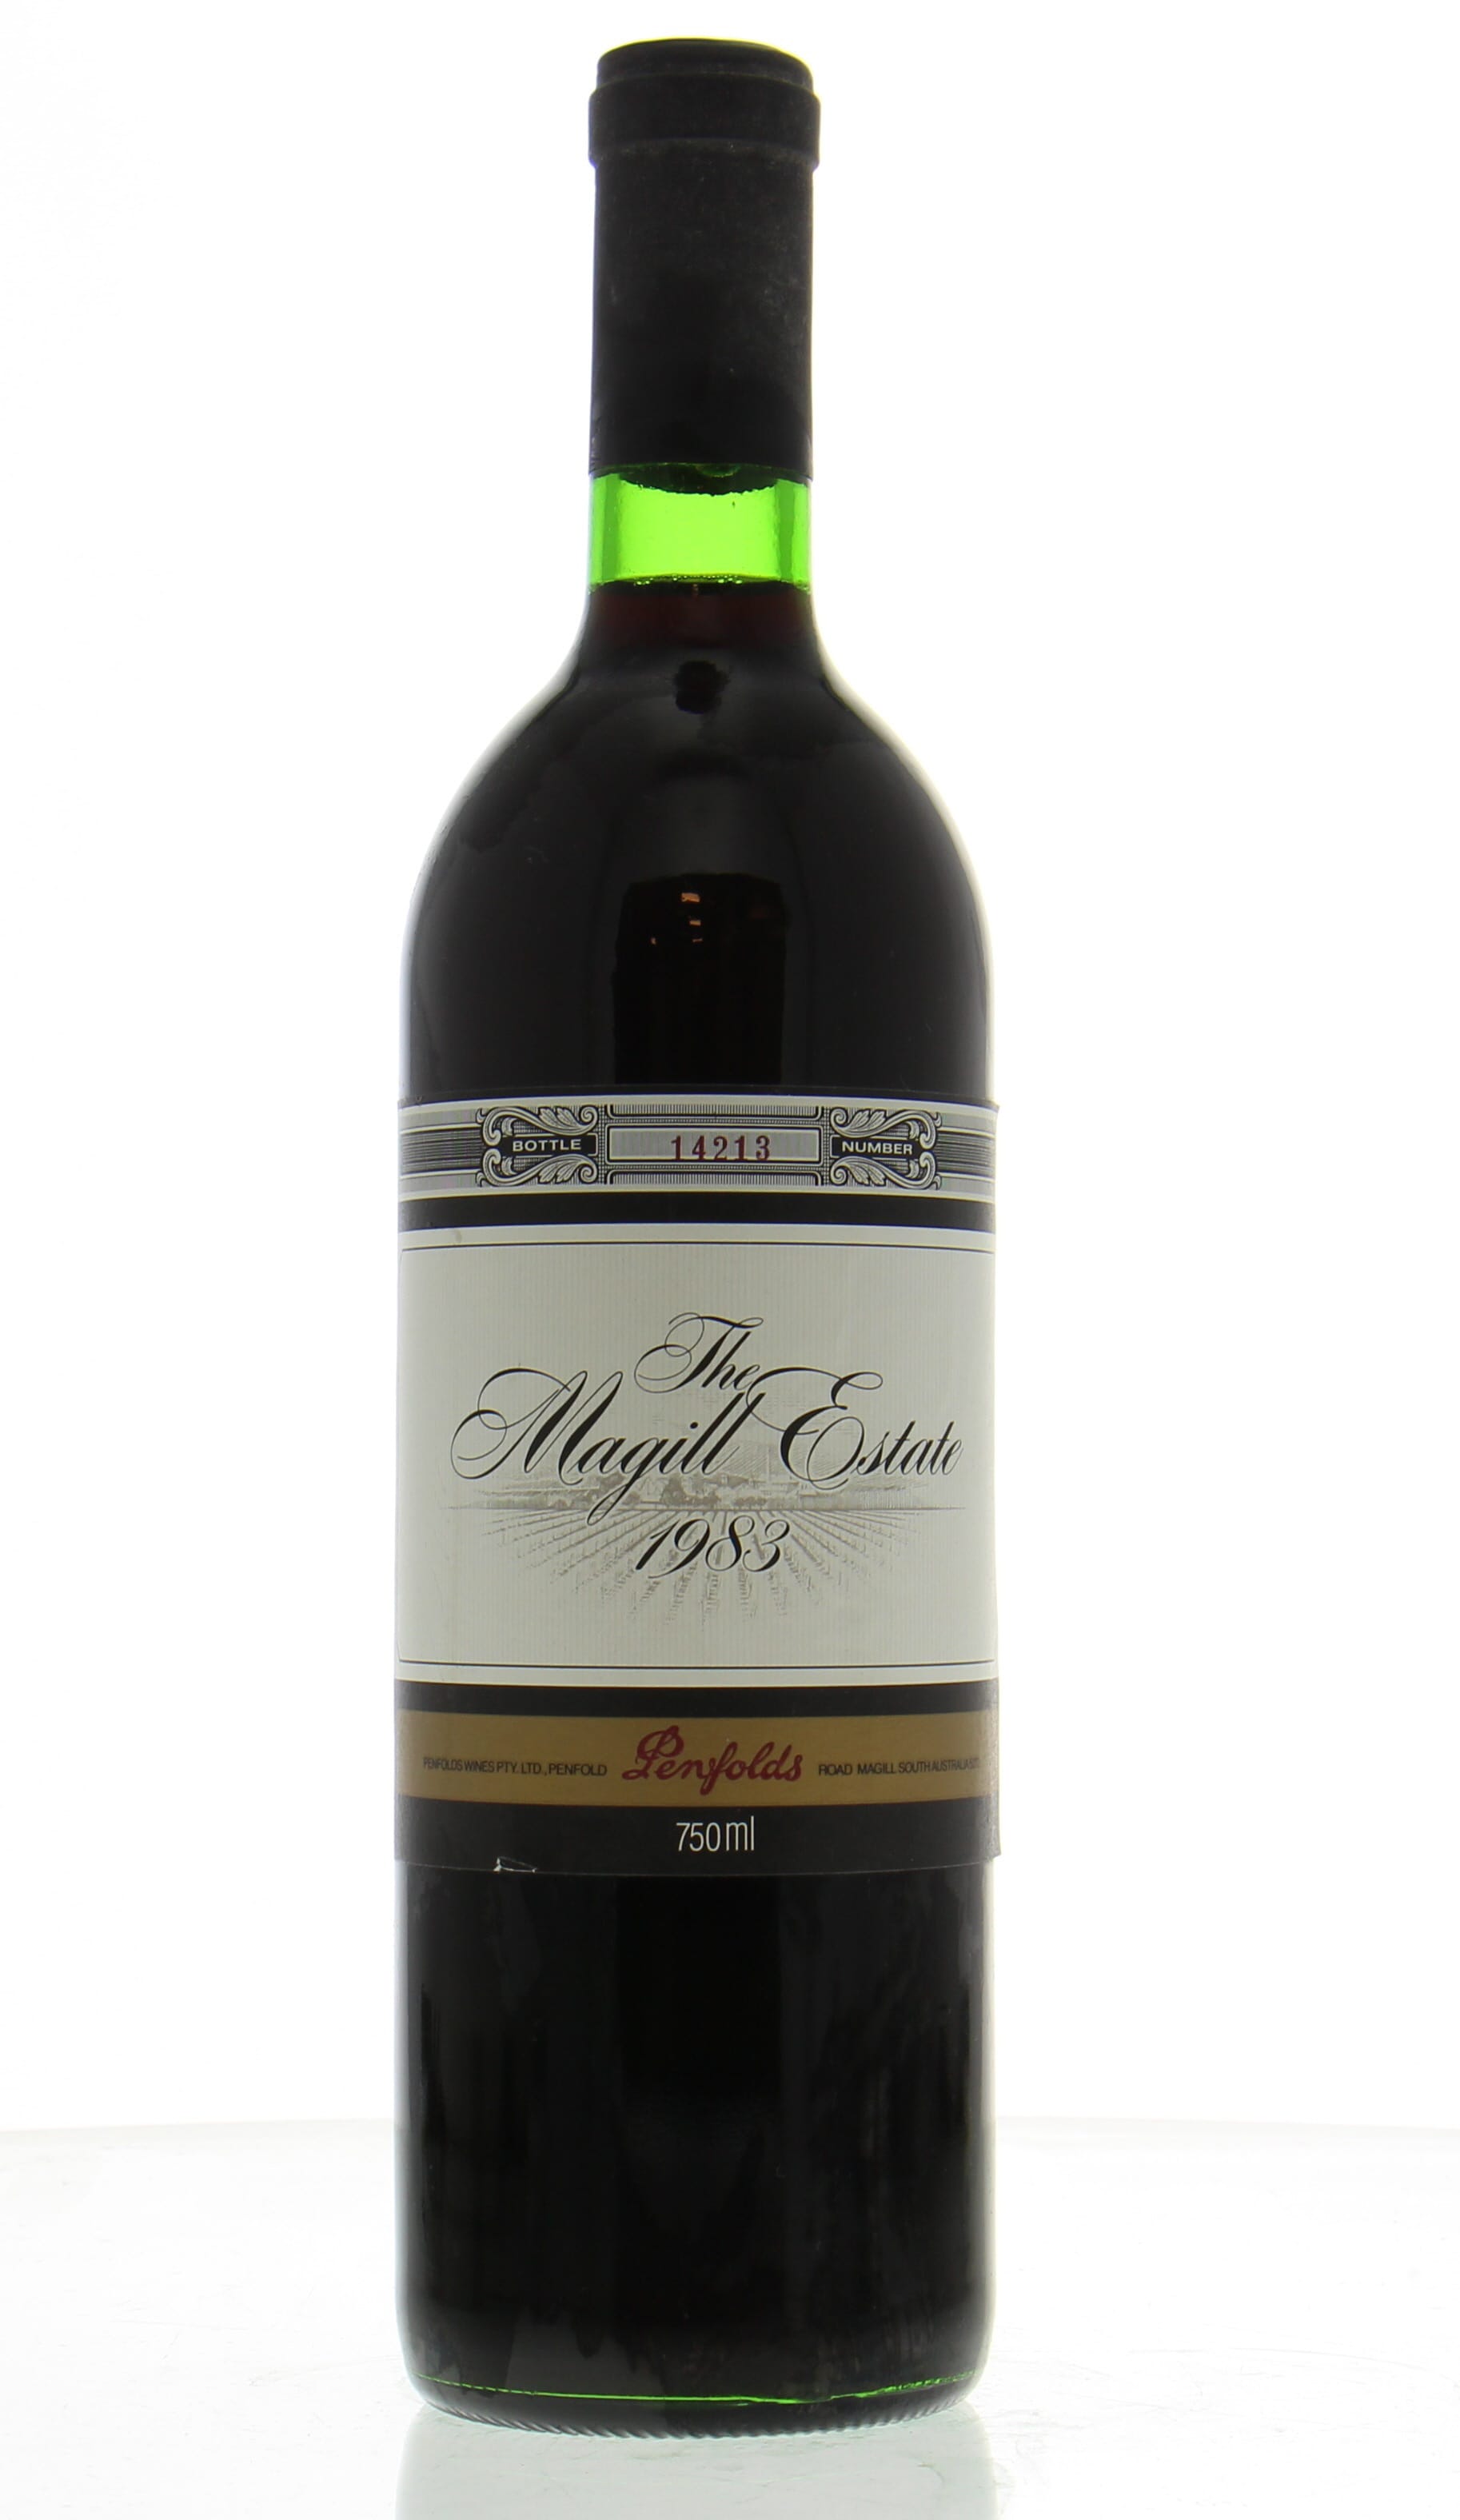 Penfolds - The Magill Estate 1983